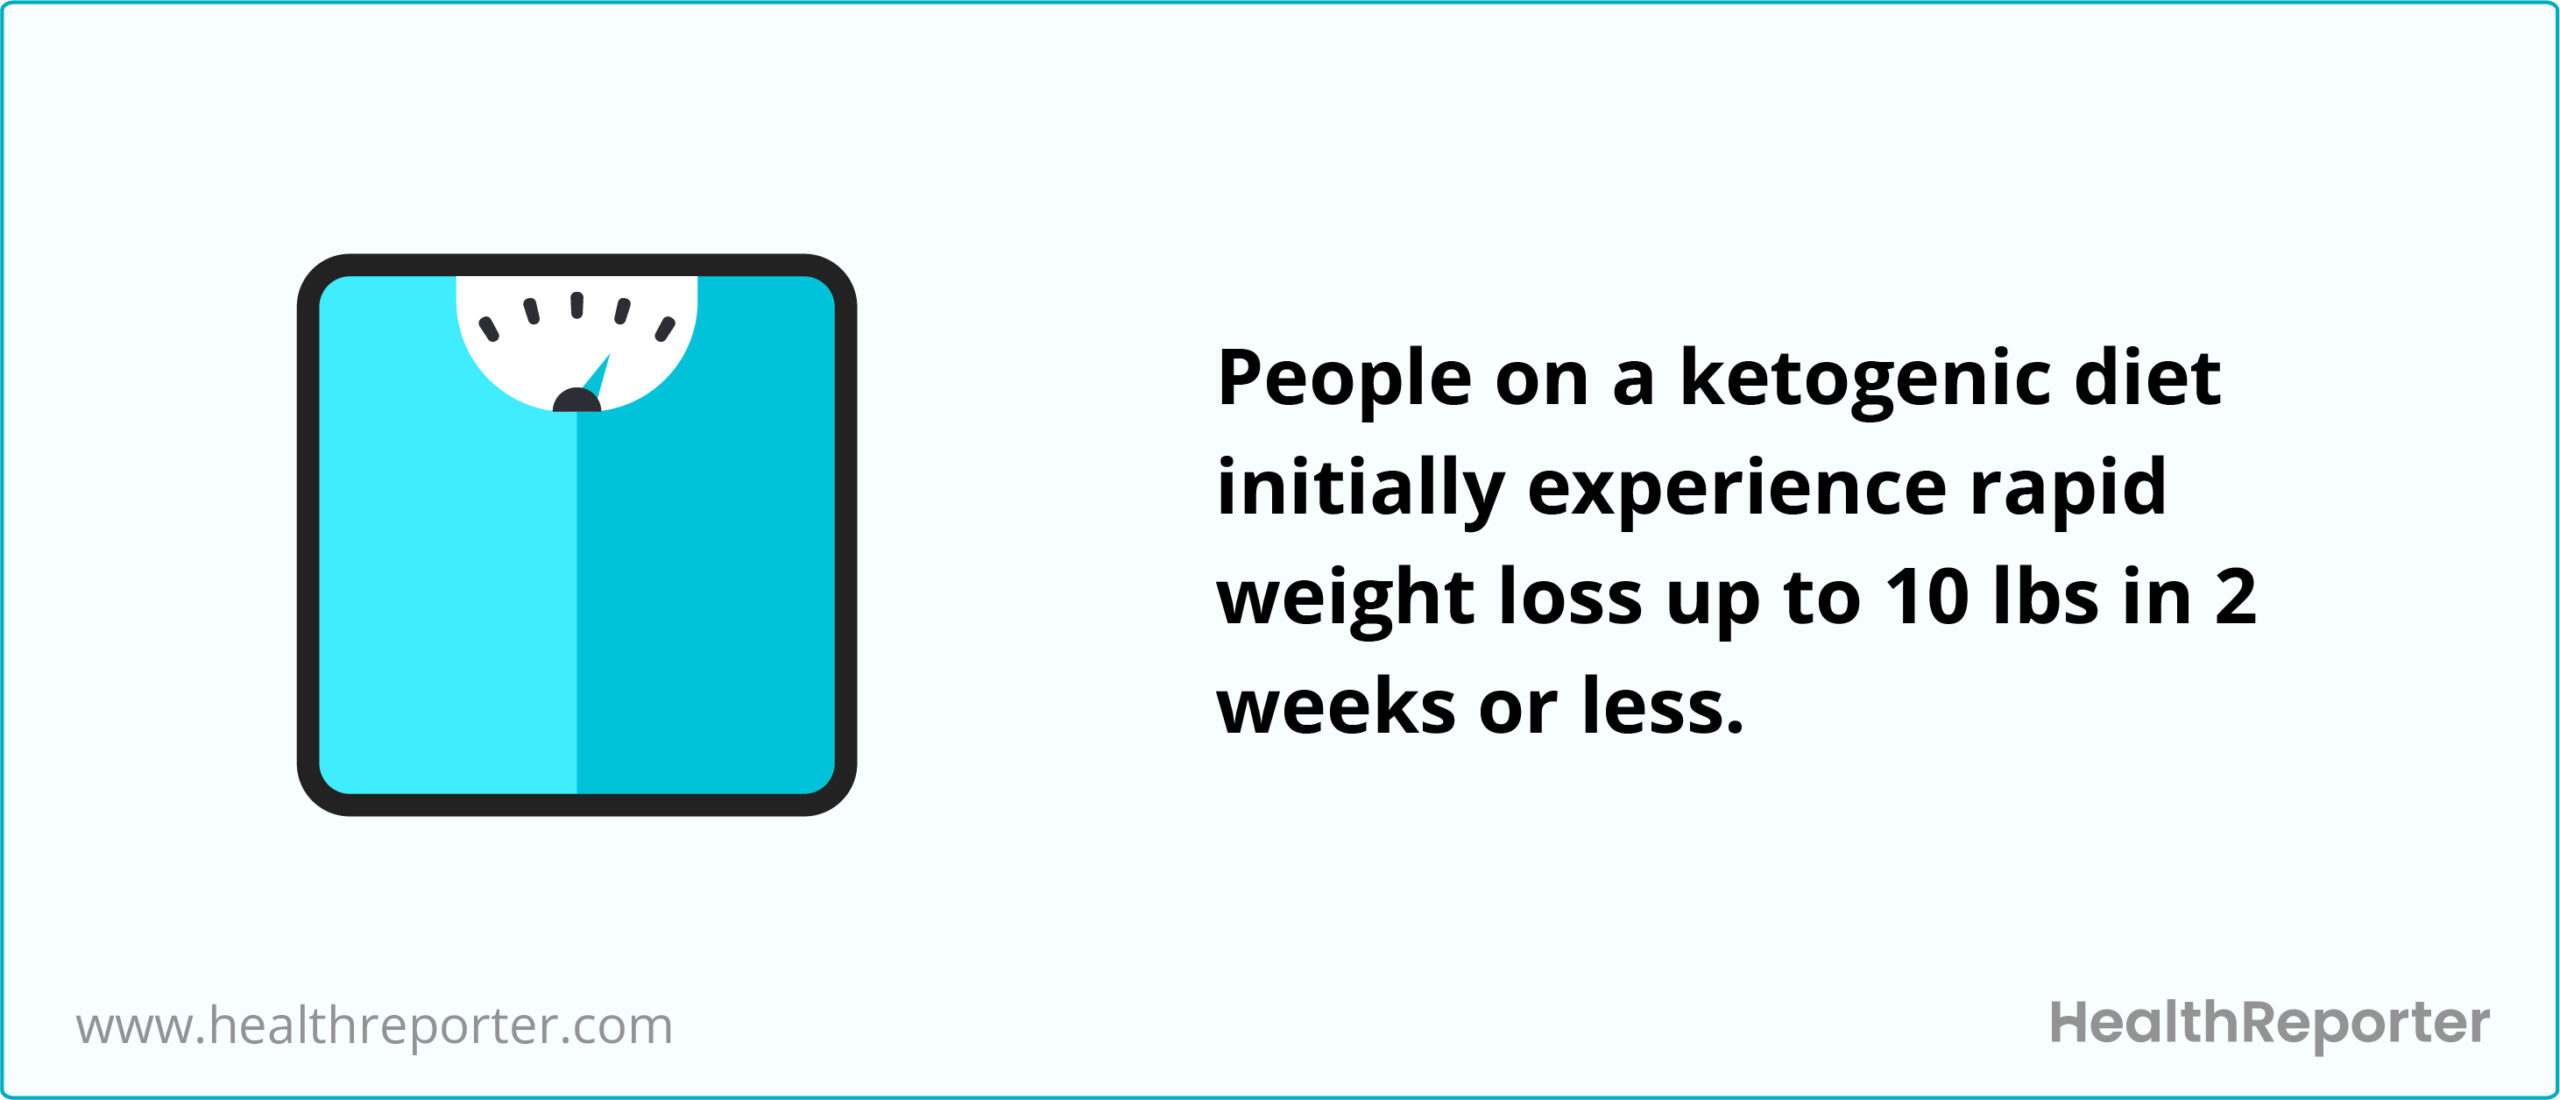 Keto statistics facts finding